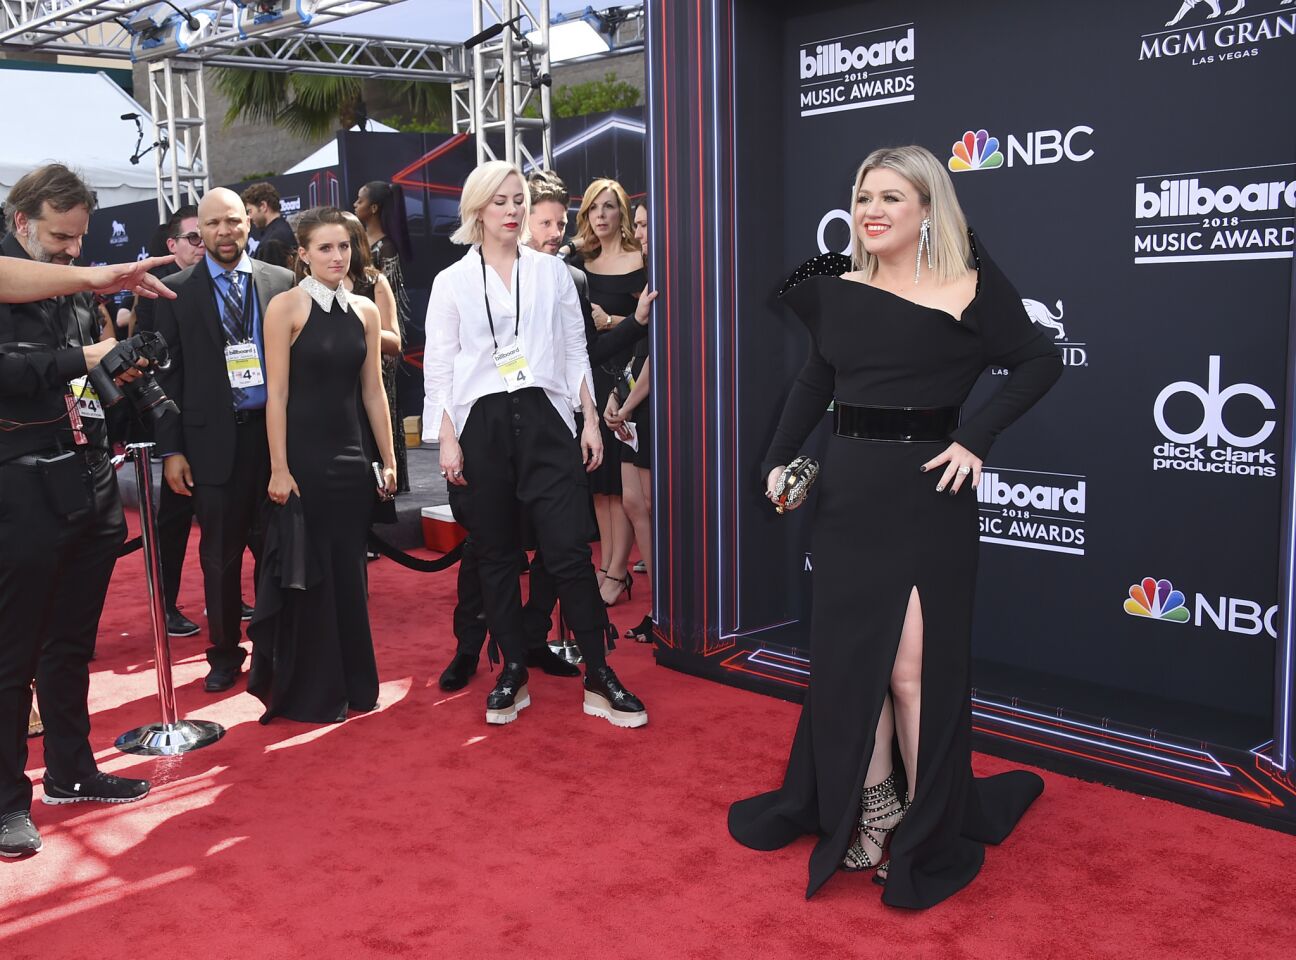 Kelly Clarkson at the Billboard Music Awards at the MGM Grand Garden Arena.